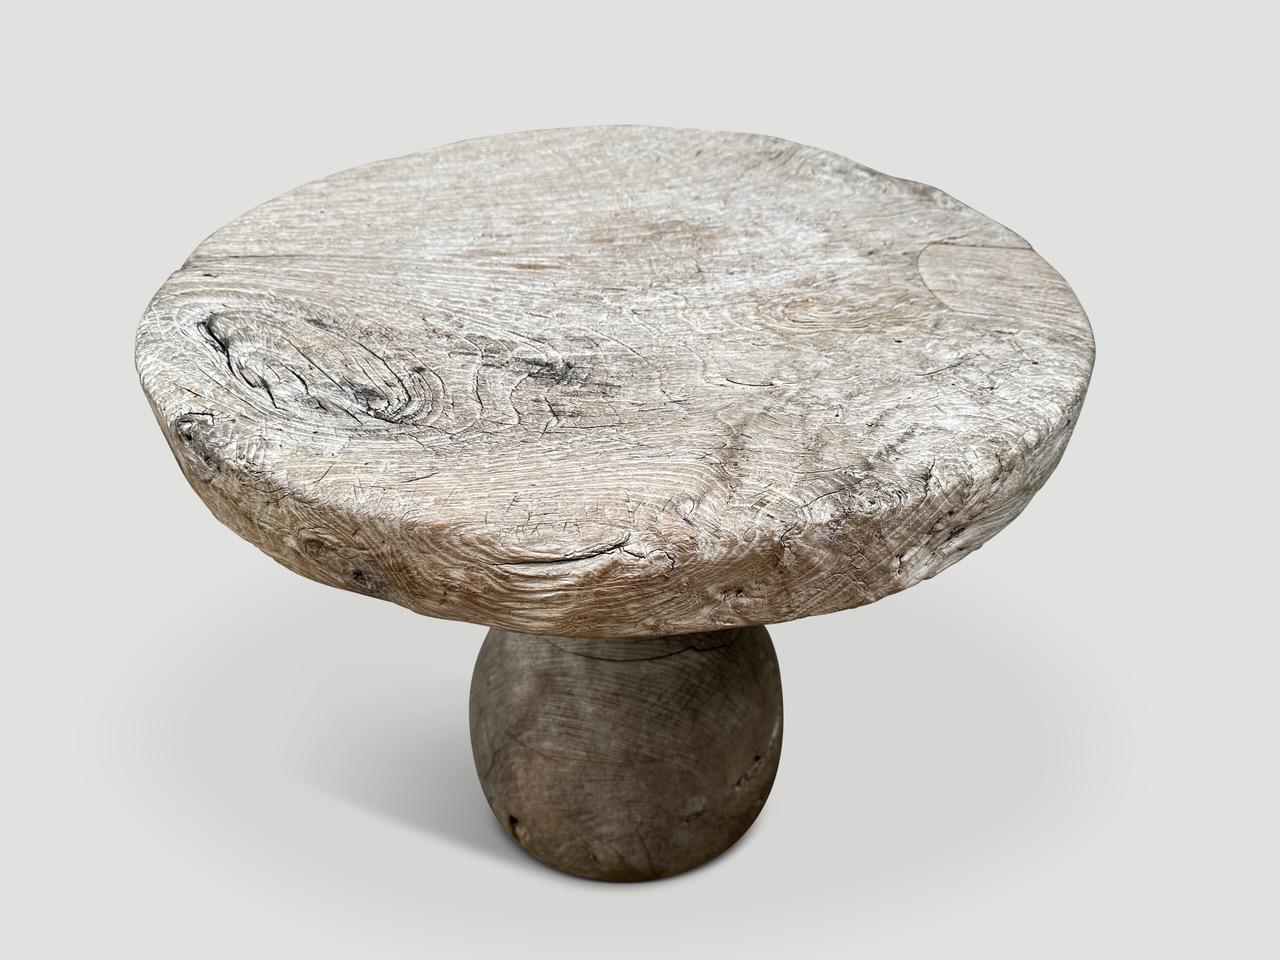 A unique table originally used to weave intricate baskets. The top is an impressive three inches thick and the sculptural base is solid teak wood. Finished in a translucent grey revealing the beautiful wood grain. It’s all in the details. 

This